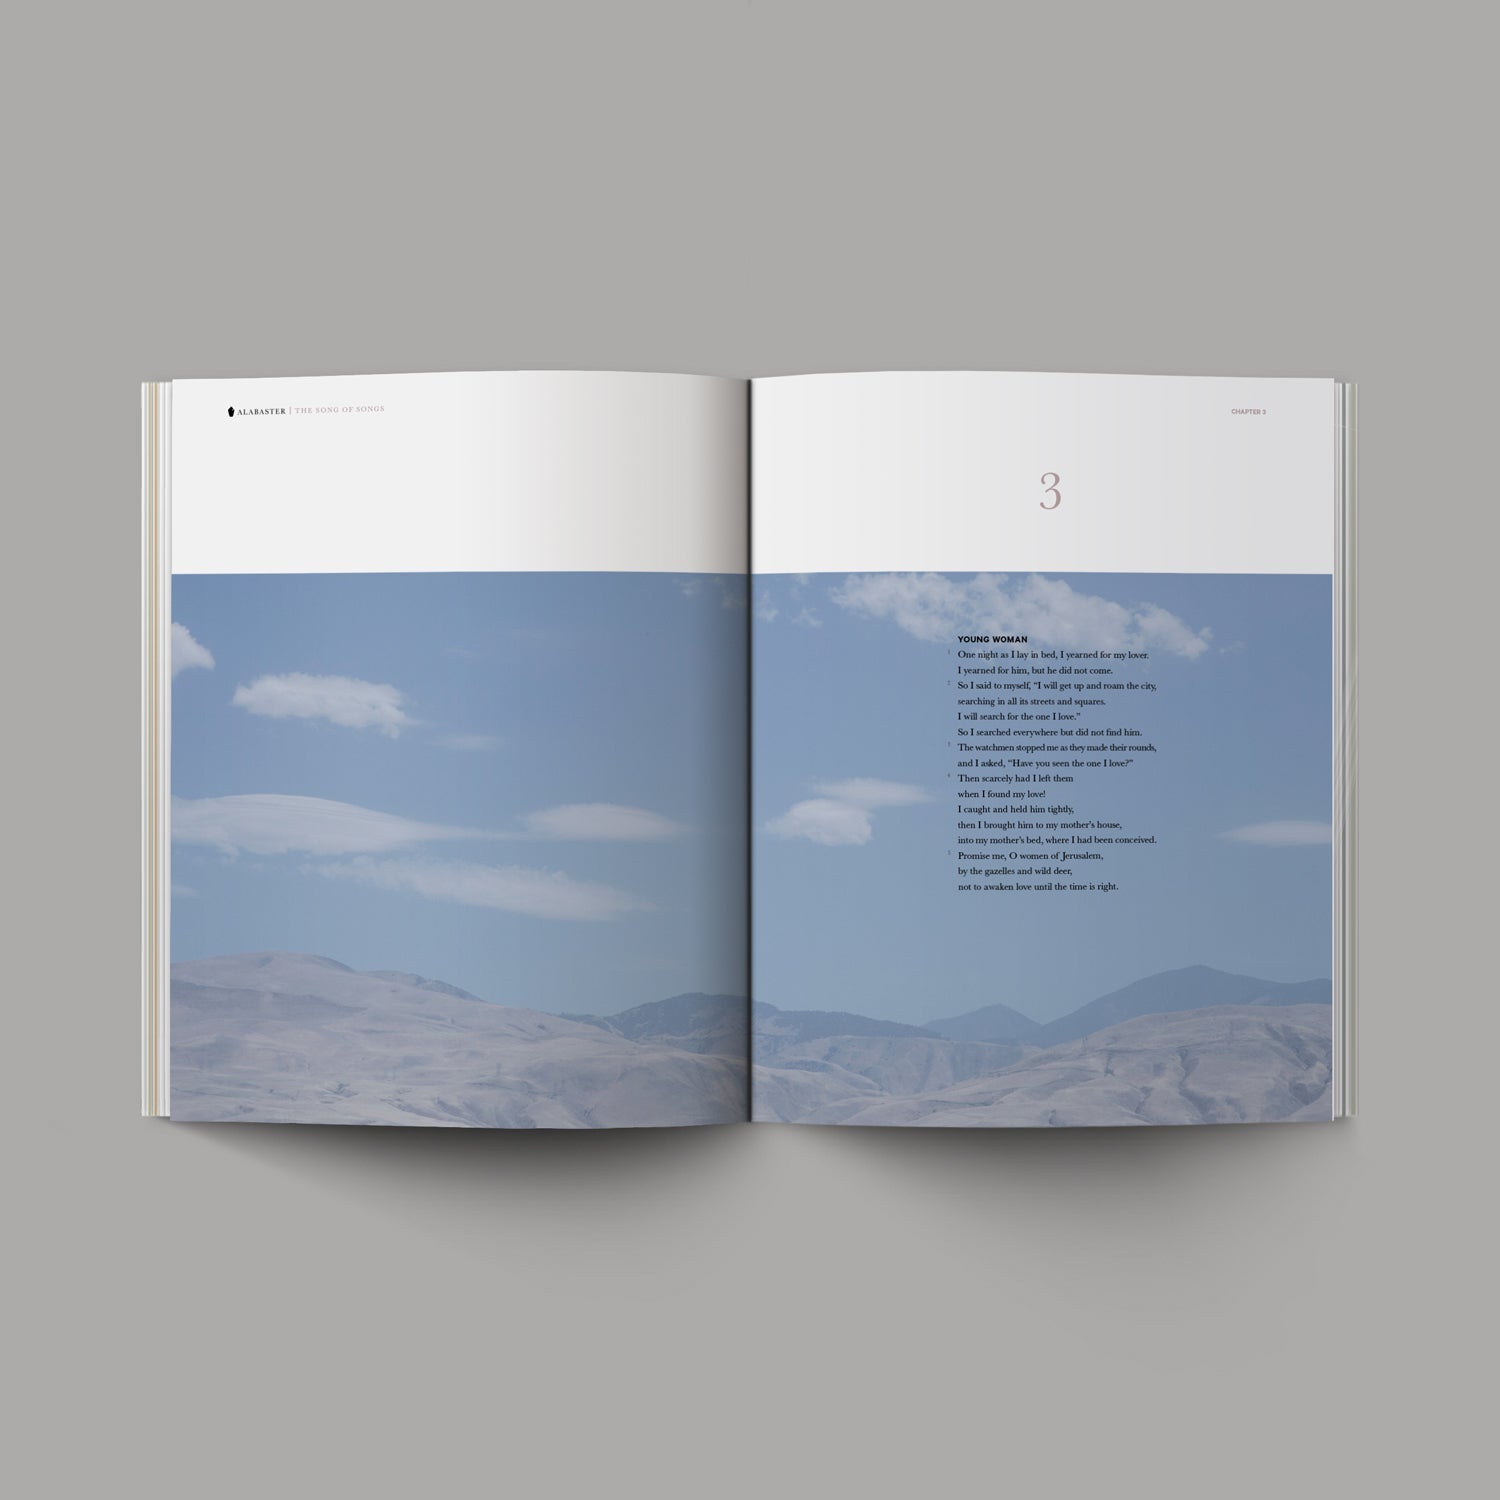 Song of Songs Chapter 3 with blue landscape image